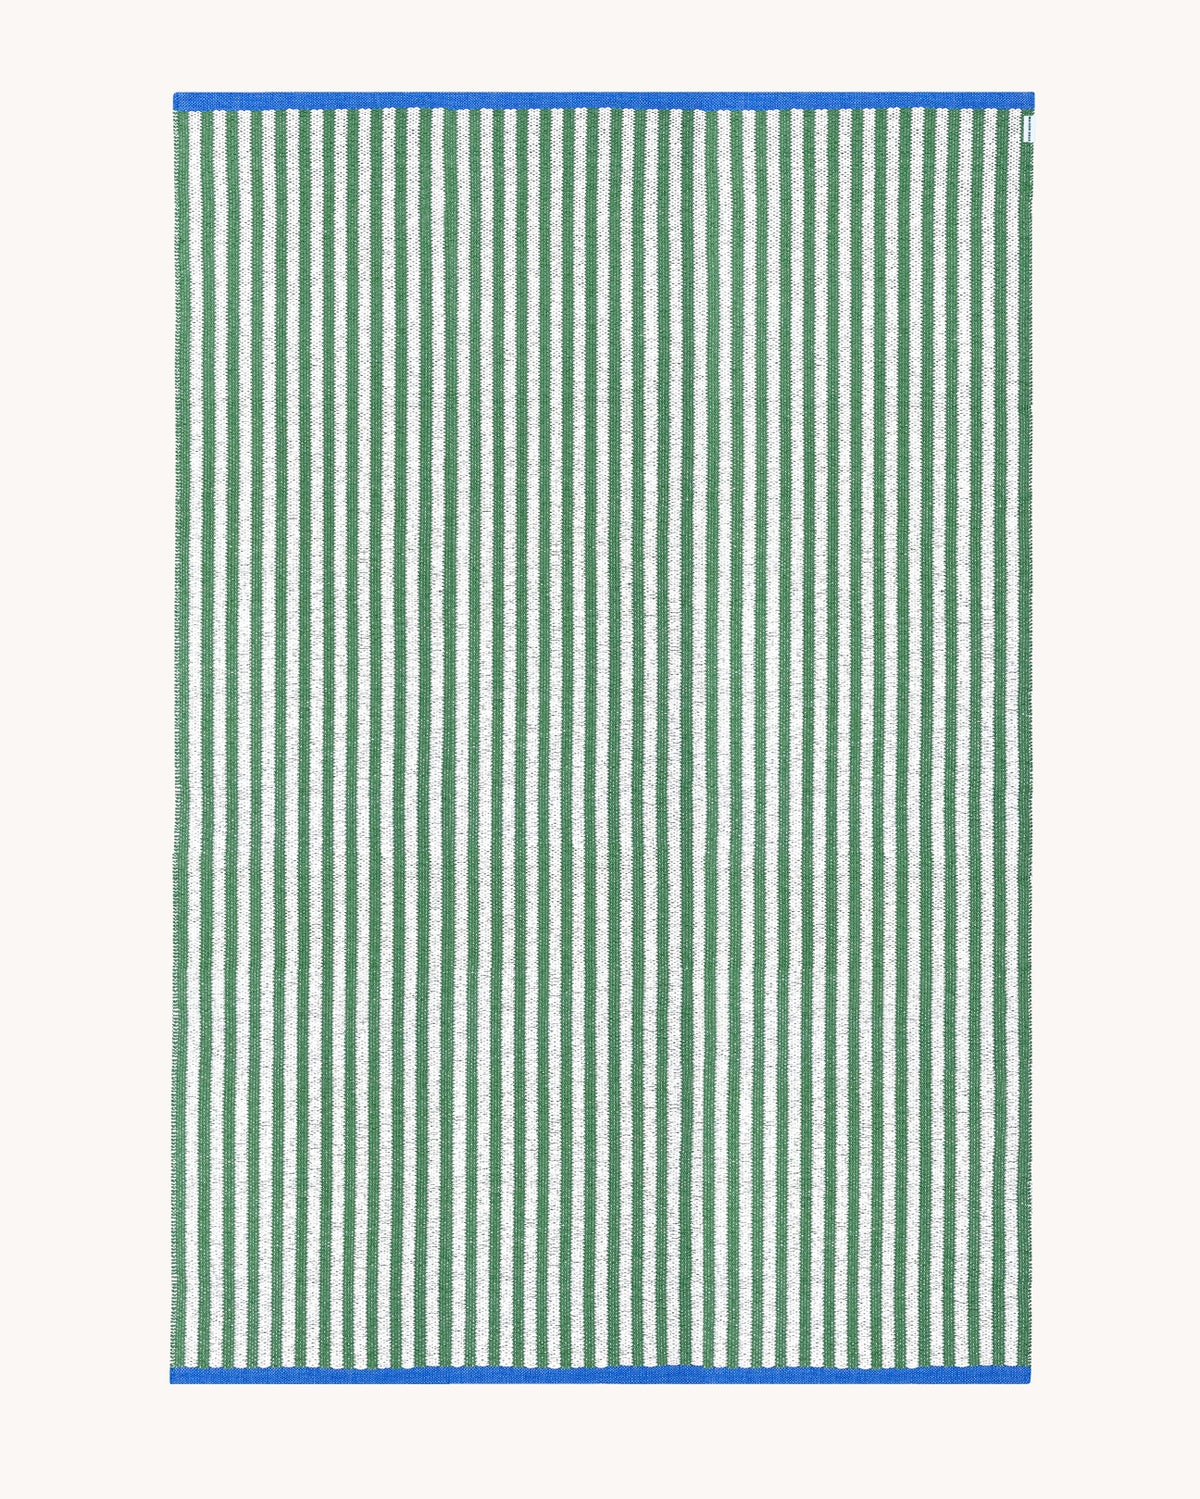 Plastic Outdoor Rugs Stripes Grass 170 x 250